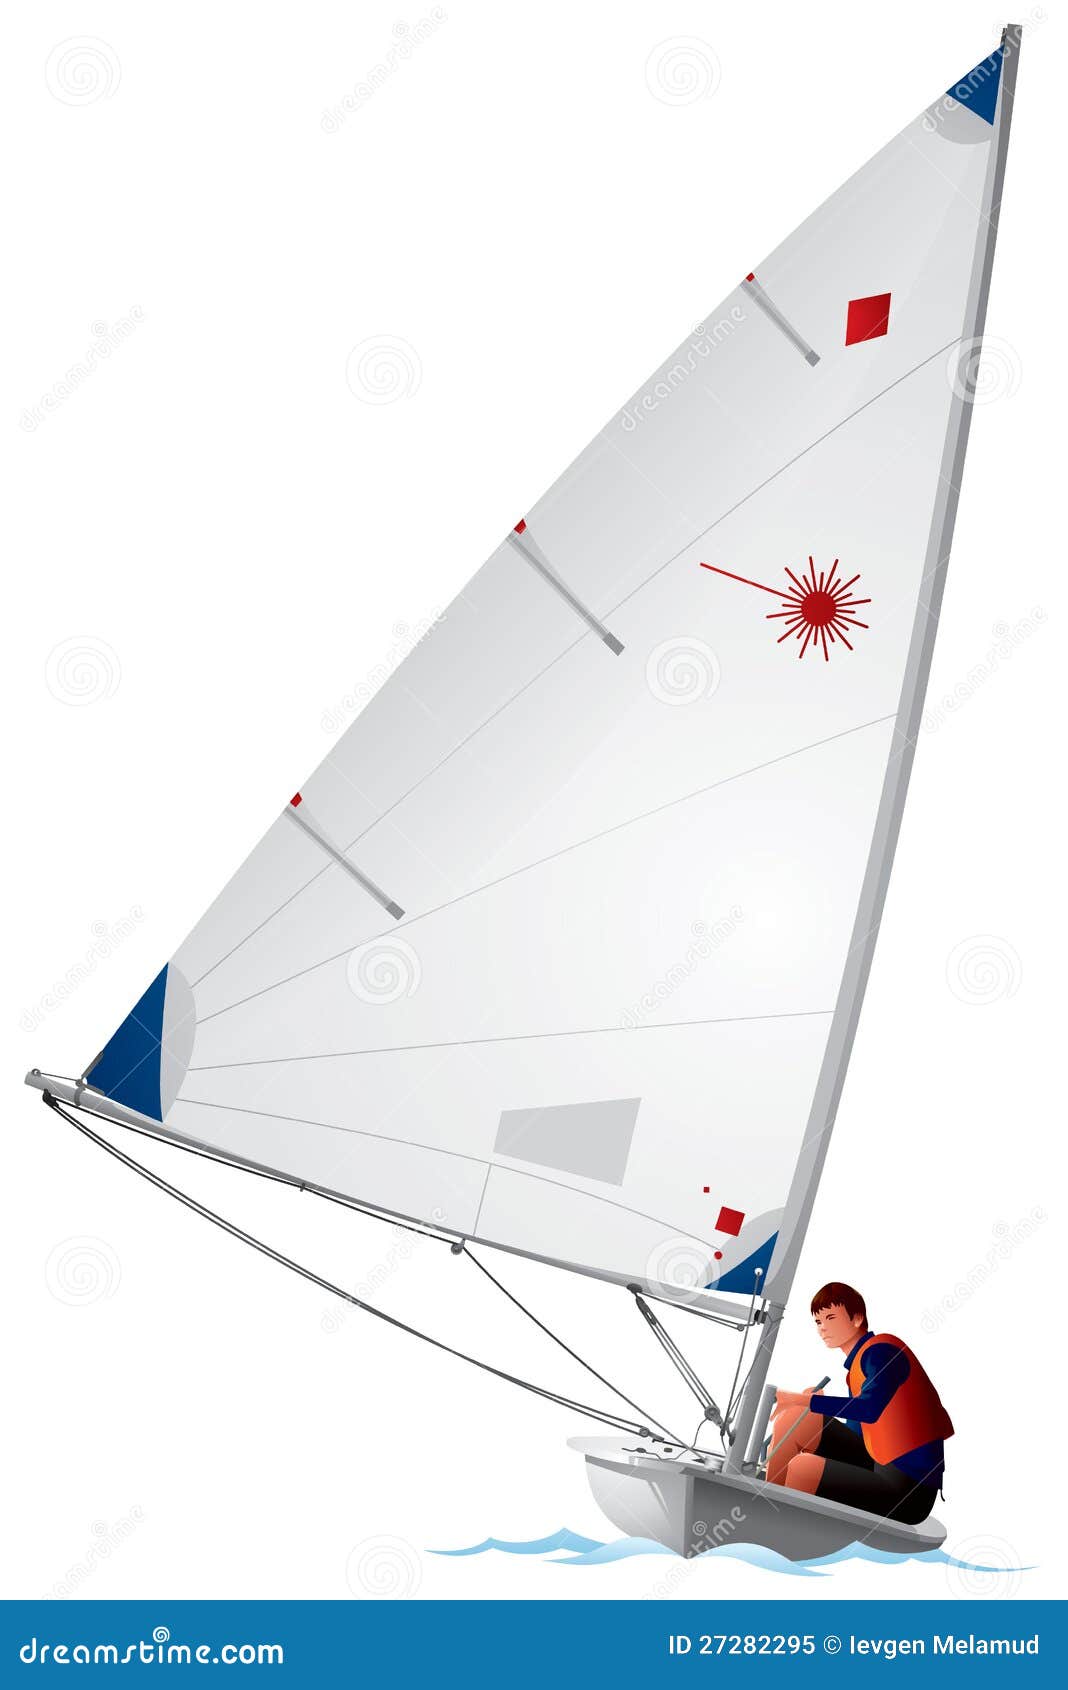 Laser Class sailboat vector illustration, sailing sport dinghy and 